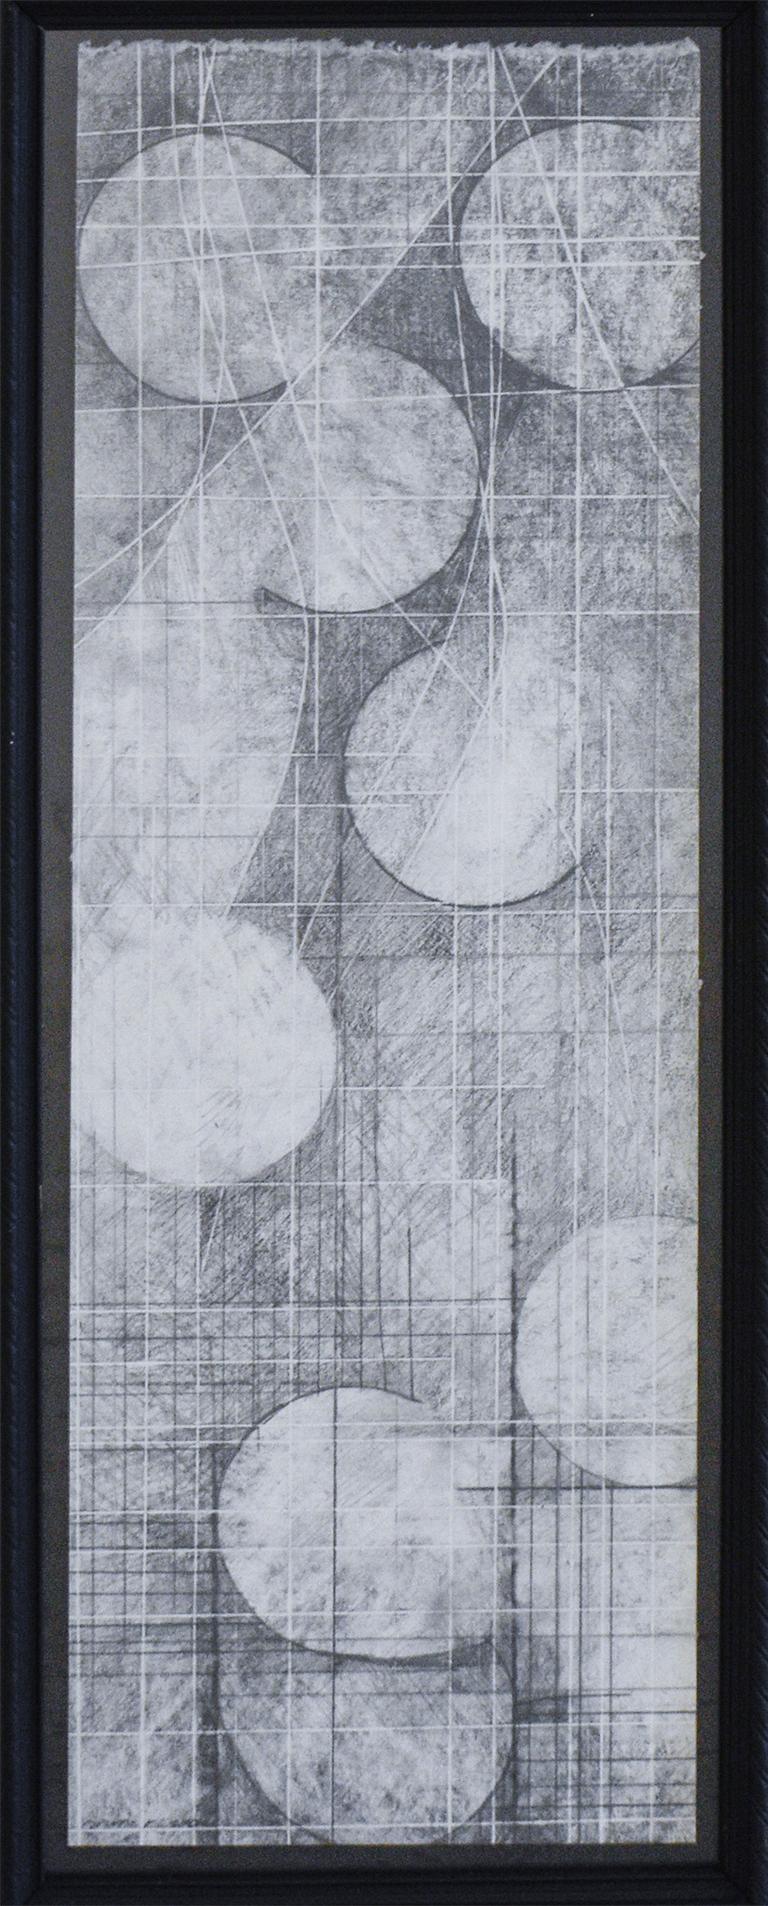 Moons of Jupiter (Study I): Black and White Abstract Geometric Graphite Drawing